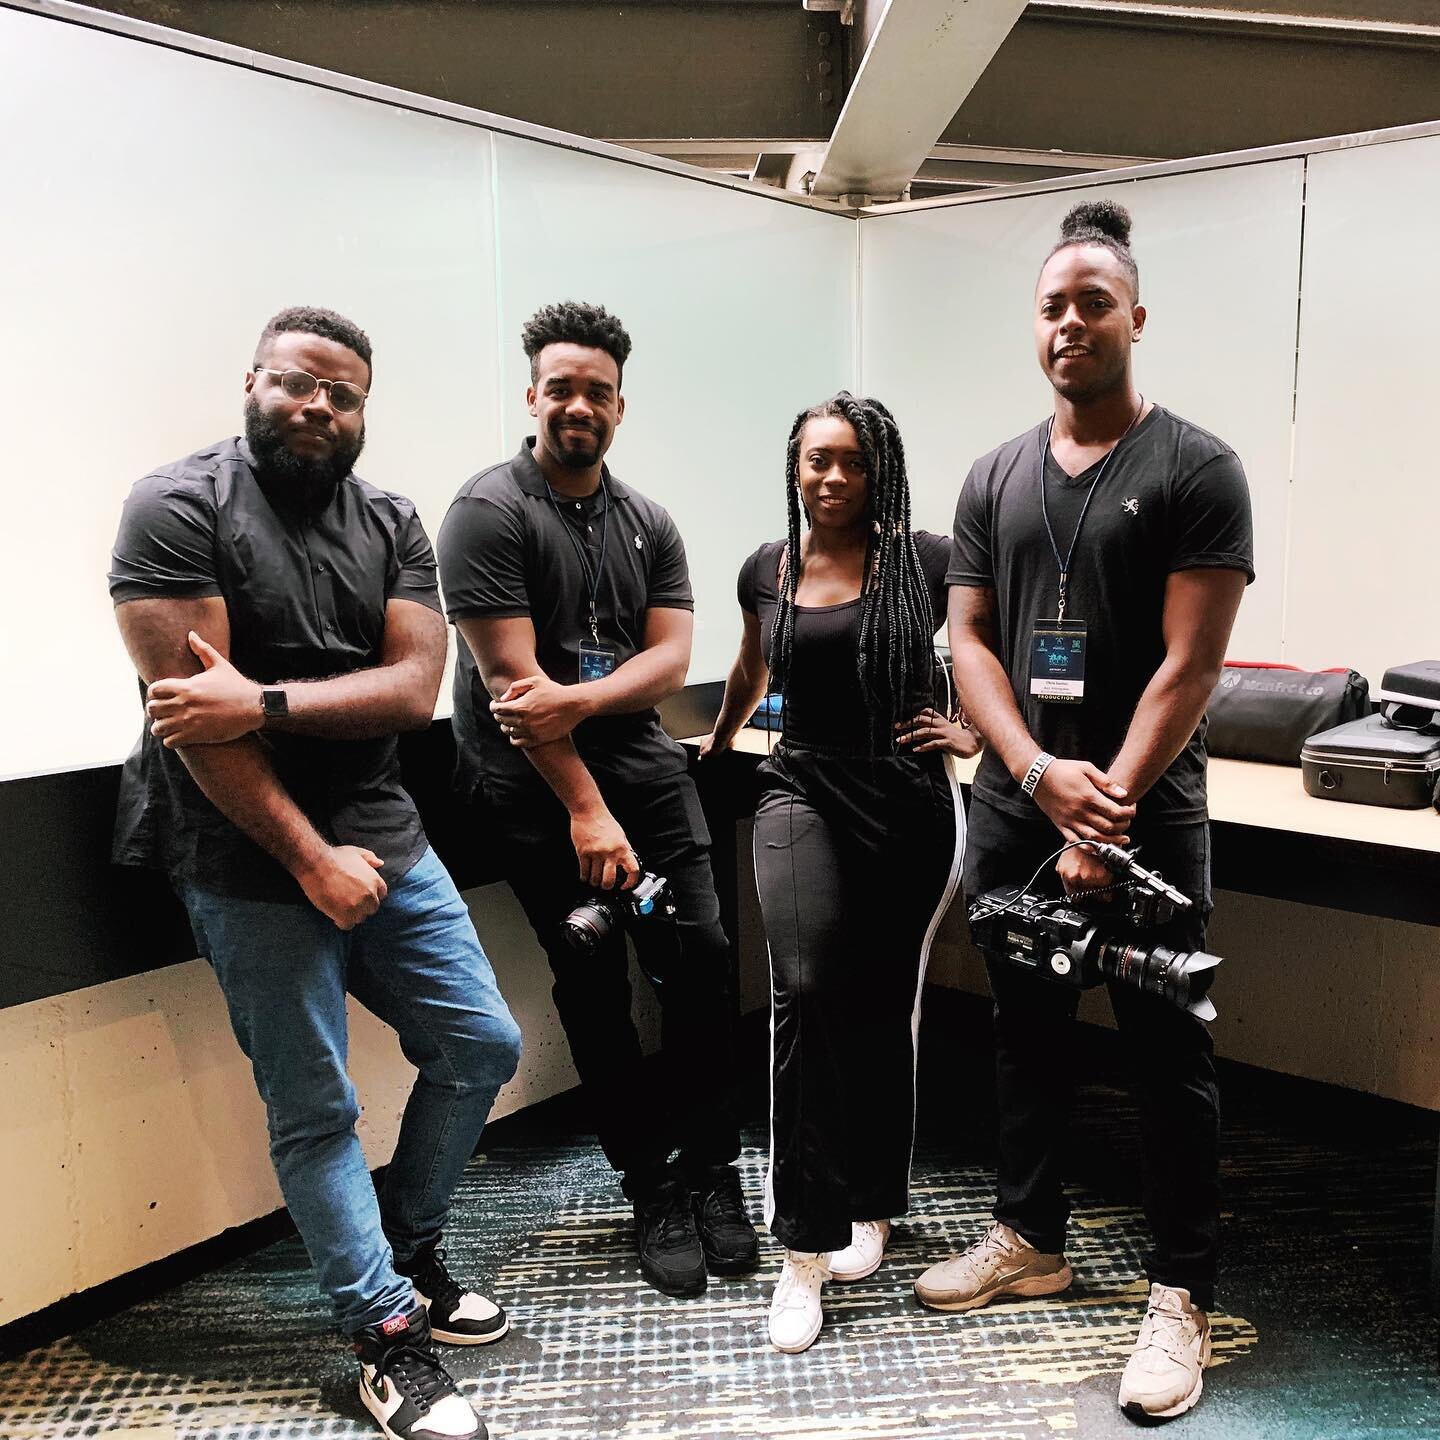 Another Year capturing the National @naacp #Actso competition. 5 Videos shot, produced, edited and premiered in 5 days. An iconic team. Video releasing later in the week. .
.
.
.
.
#naacp #detroit #onset #filmcrew #showblack #setlife #camerateam #fil